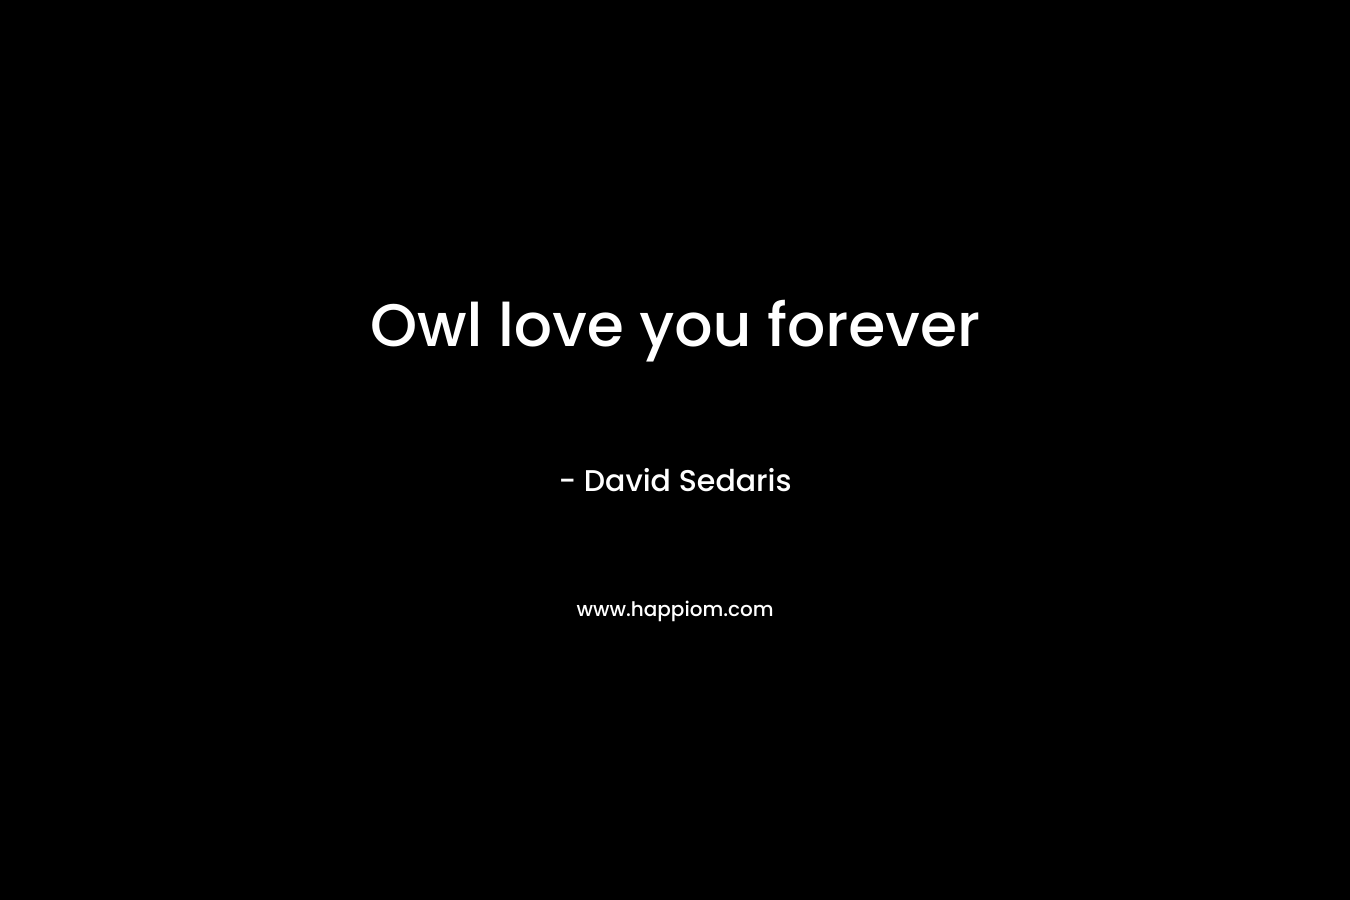 Owl love you forever